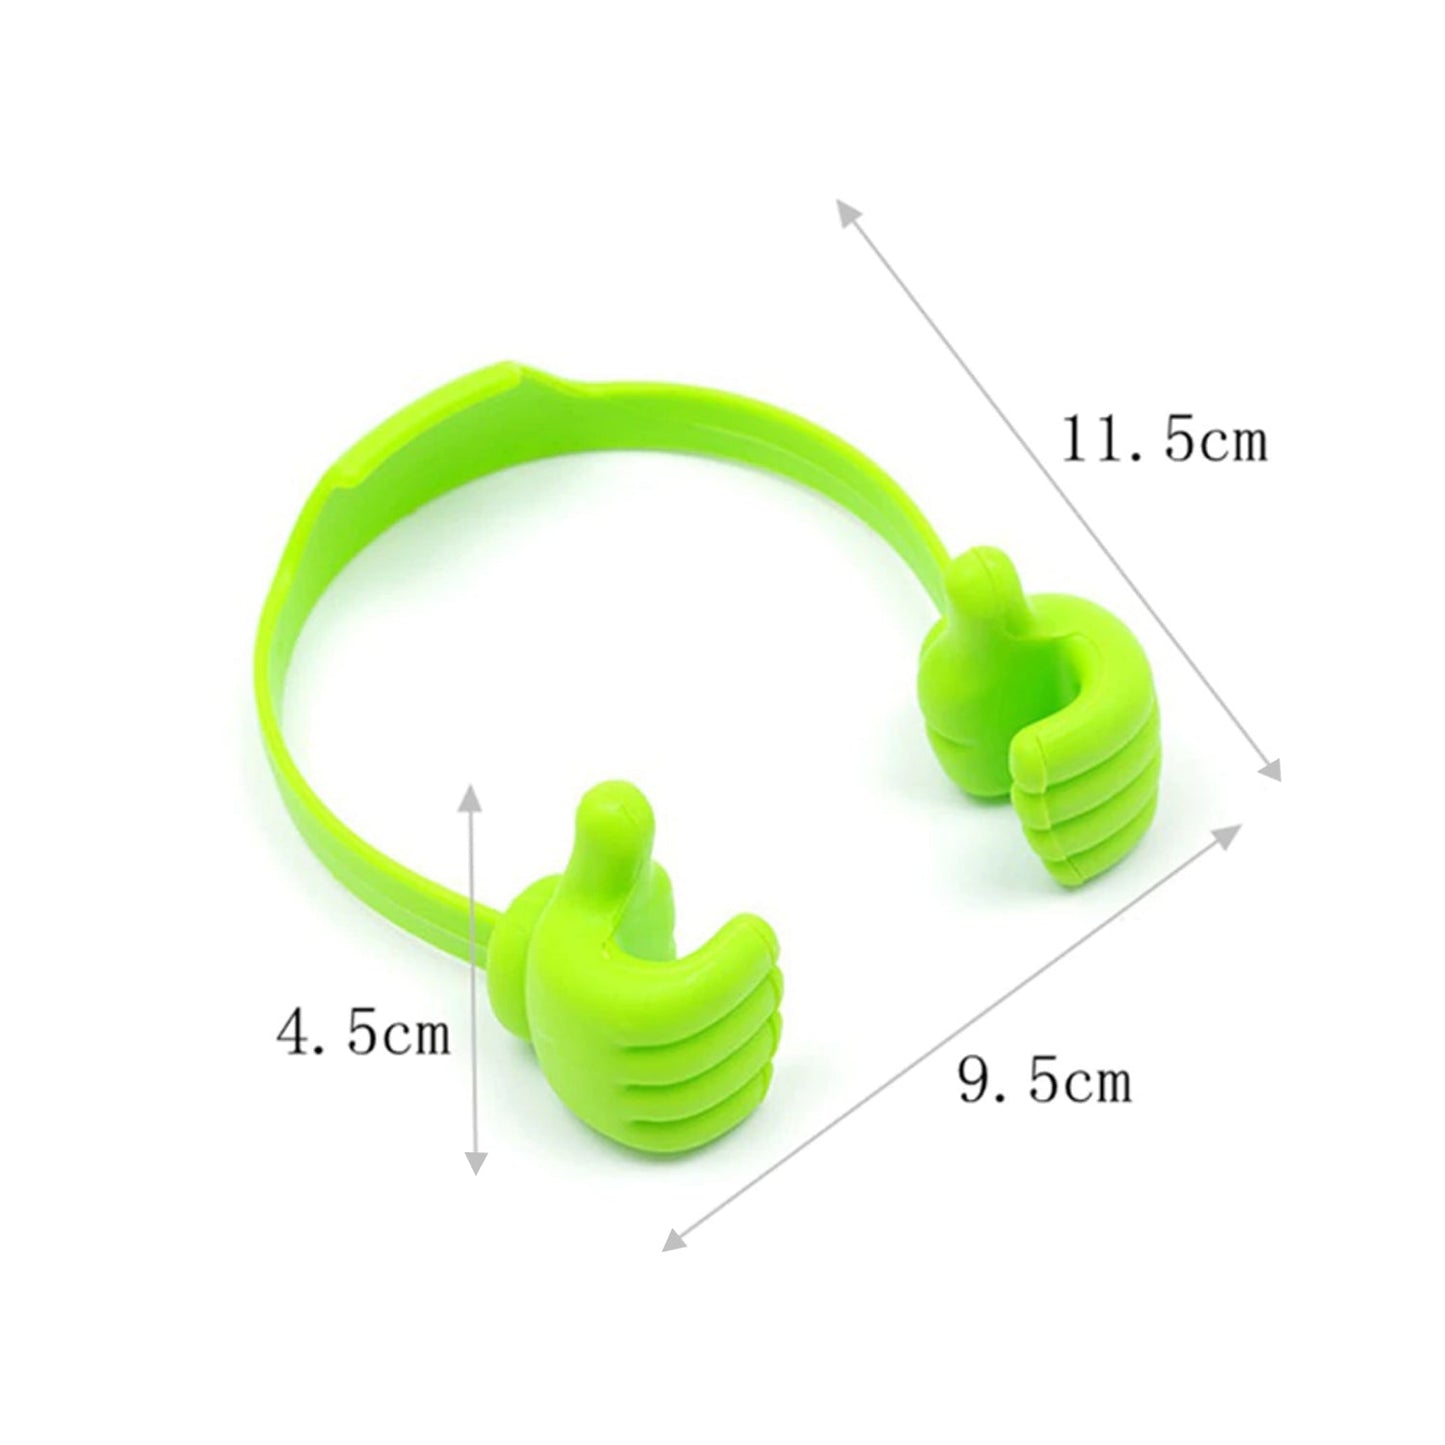 6132 4 Pc Hand Shape Mobile Stand used in all kinds of places including household and offices as a mobile supporting stand.